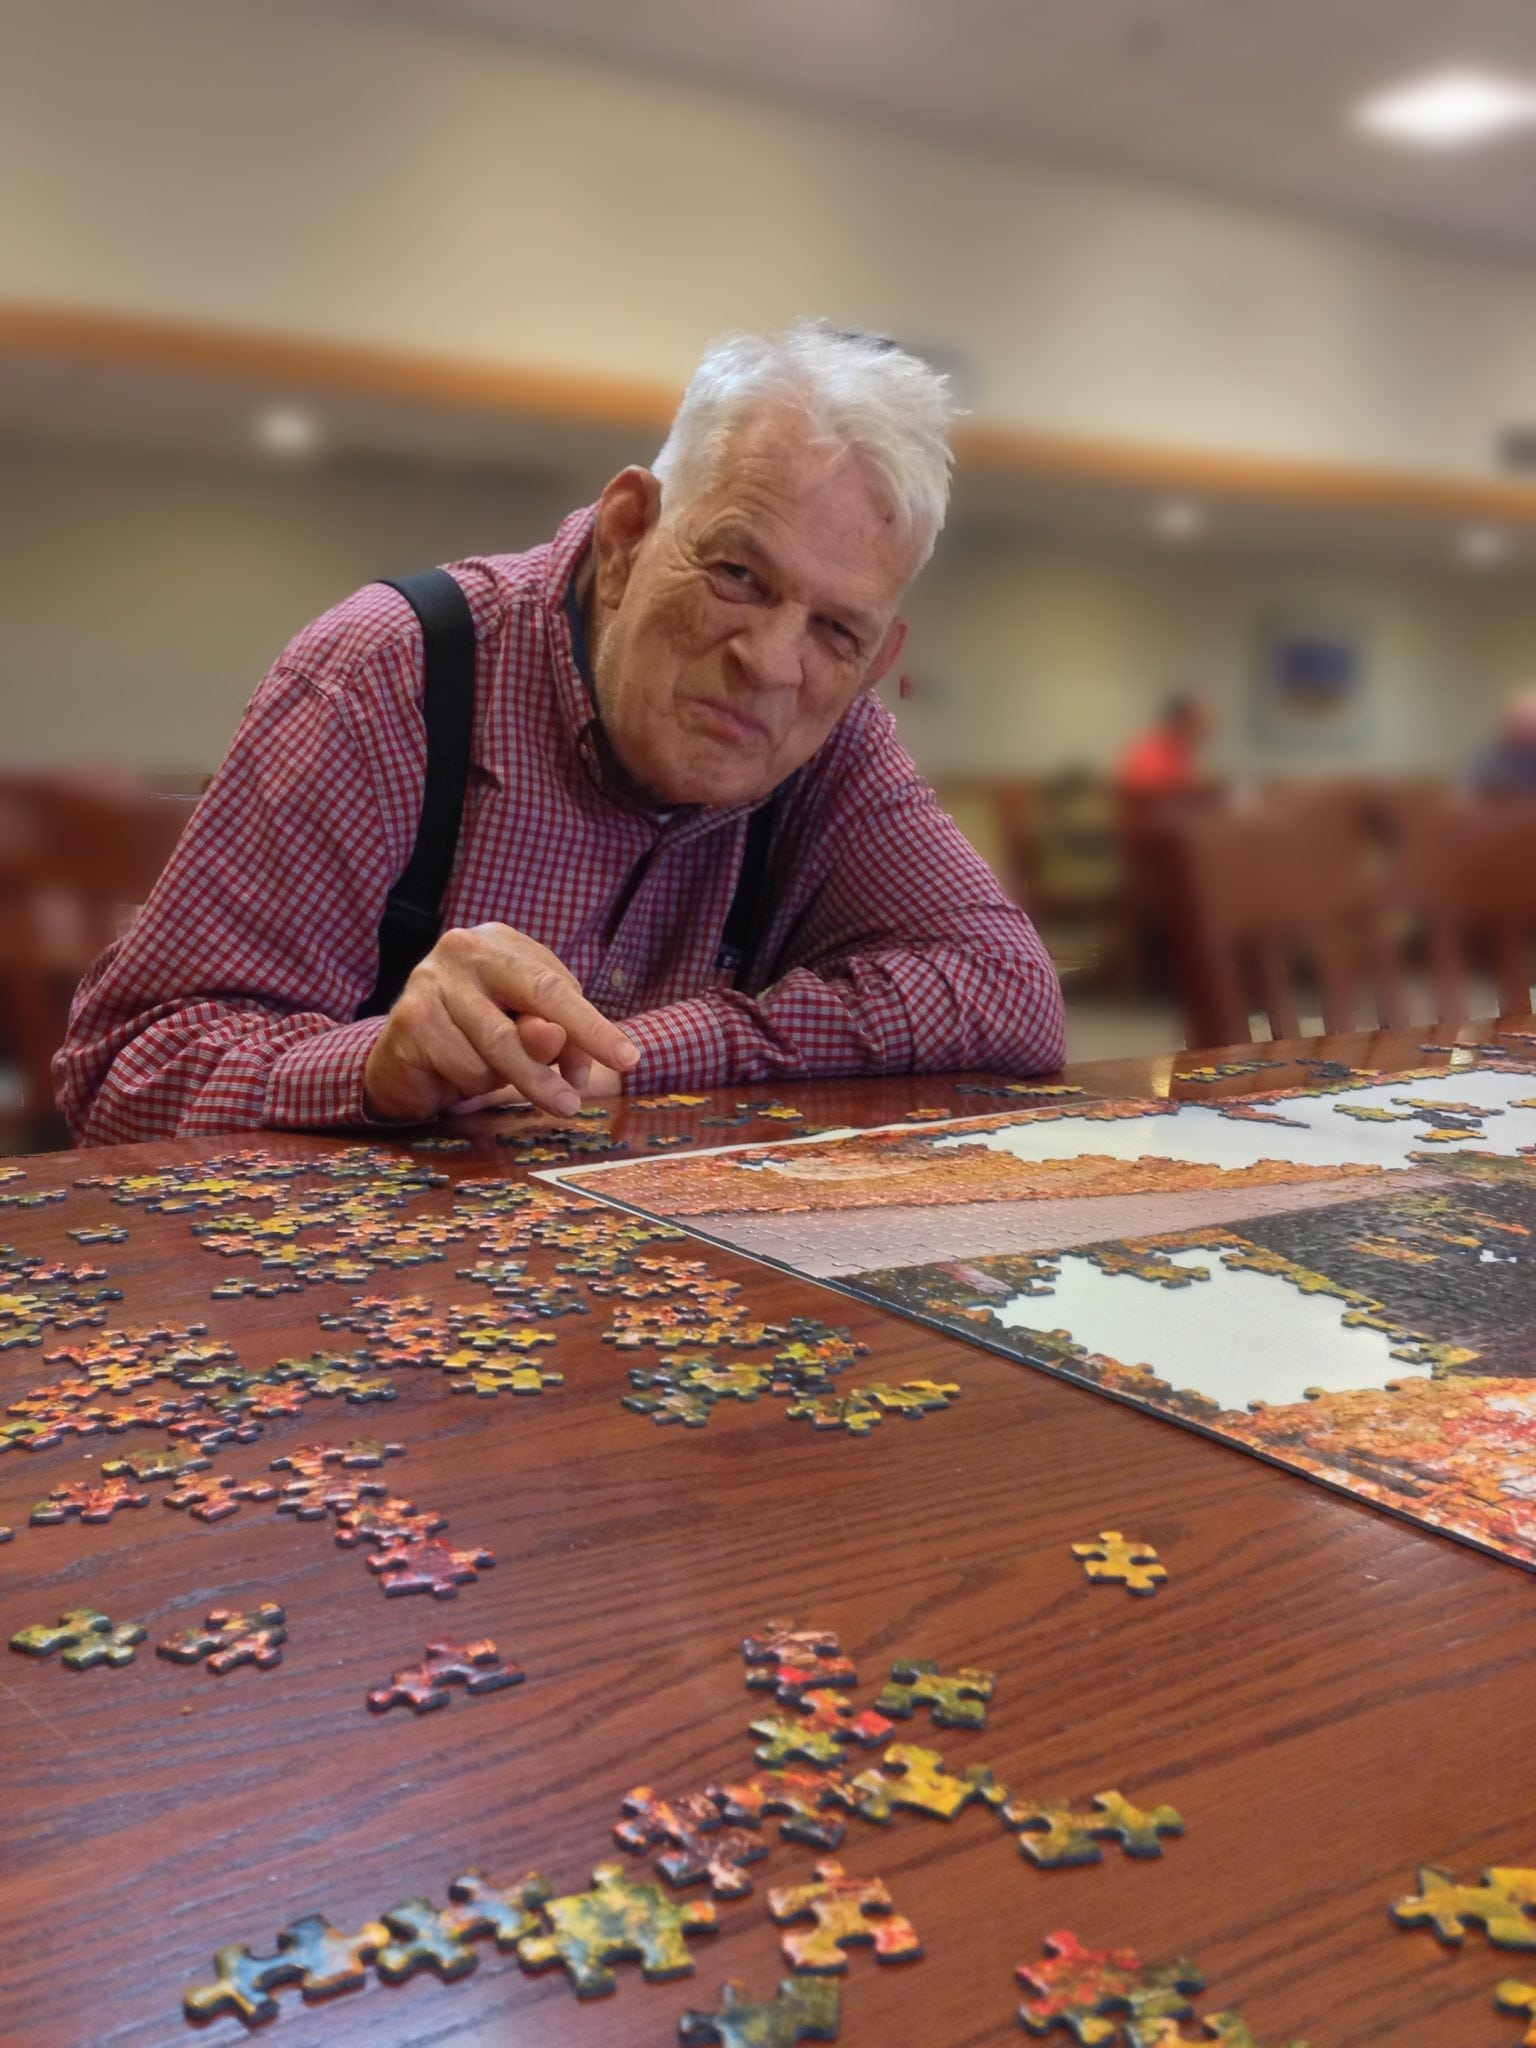 A smiling man sitting at a table working on a jigsaw puzzle.